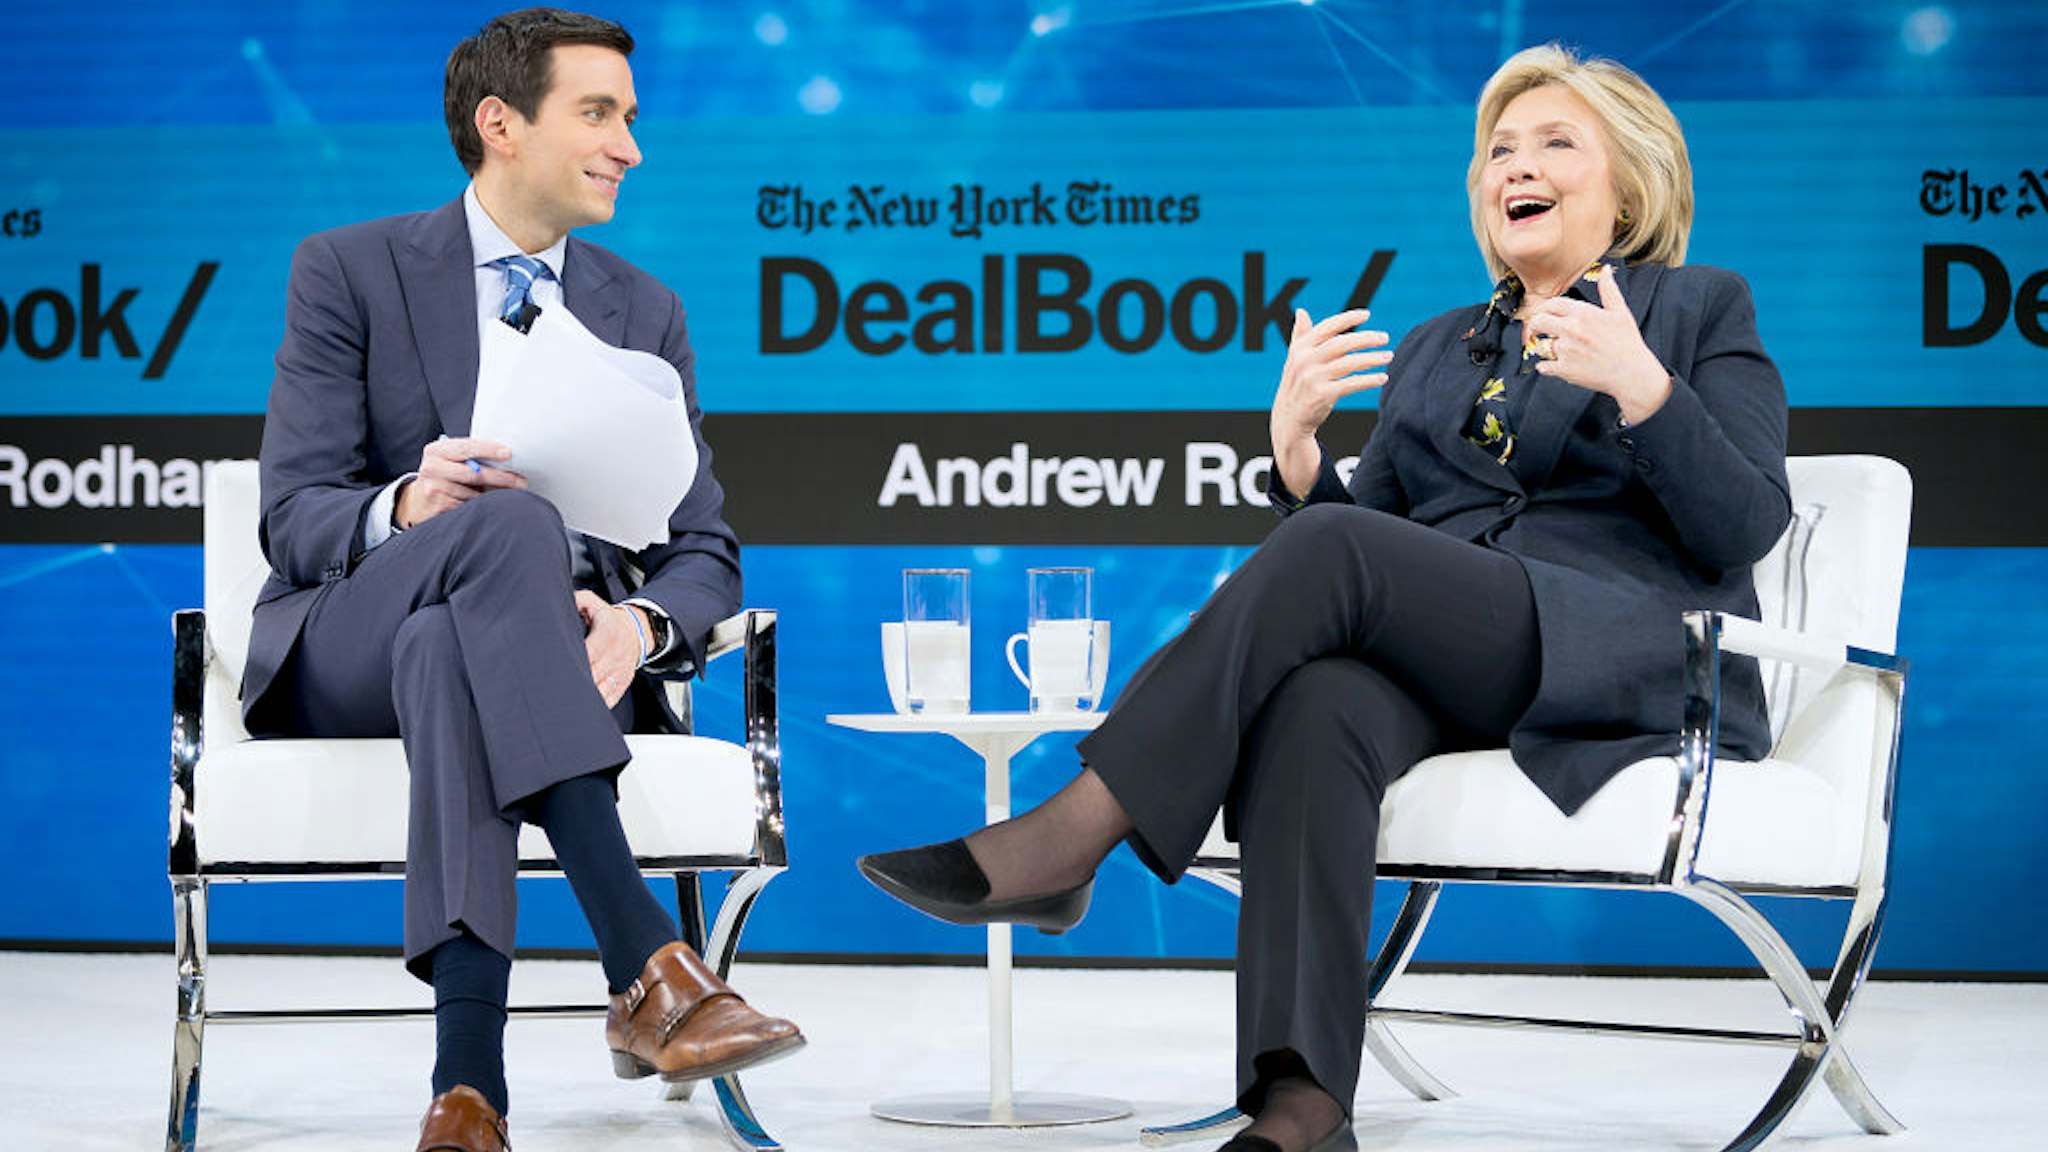 Andrew Ross Sorkin, Editor at Large, Columnist and Founder, DealBook, The New York Times speaks with Hillary Rodham Clinton, Former First Lady, U.S. Senator, U.S. Secretary of State onstage at 2019 New York Times Dealbook on November 06, 2019 in New York City.